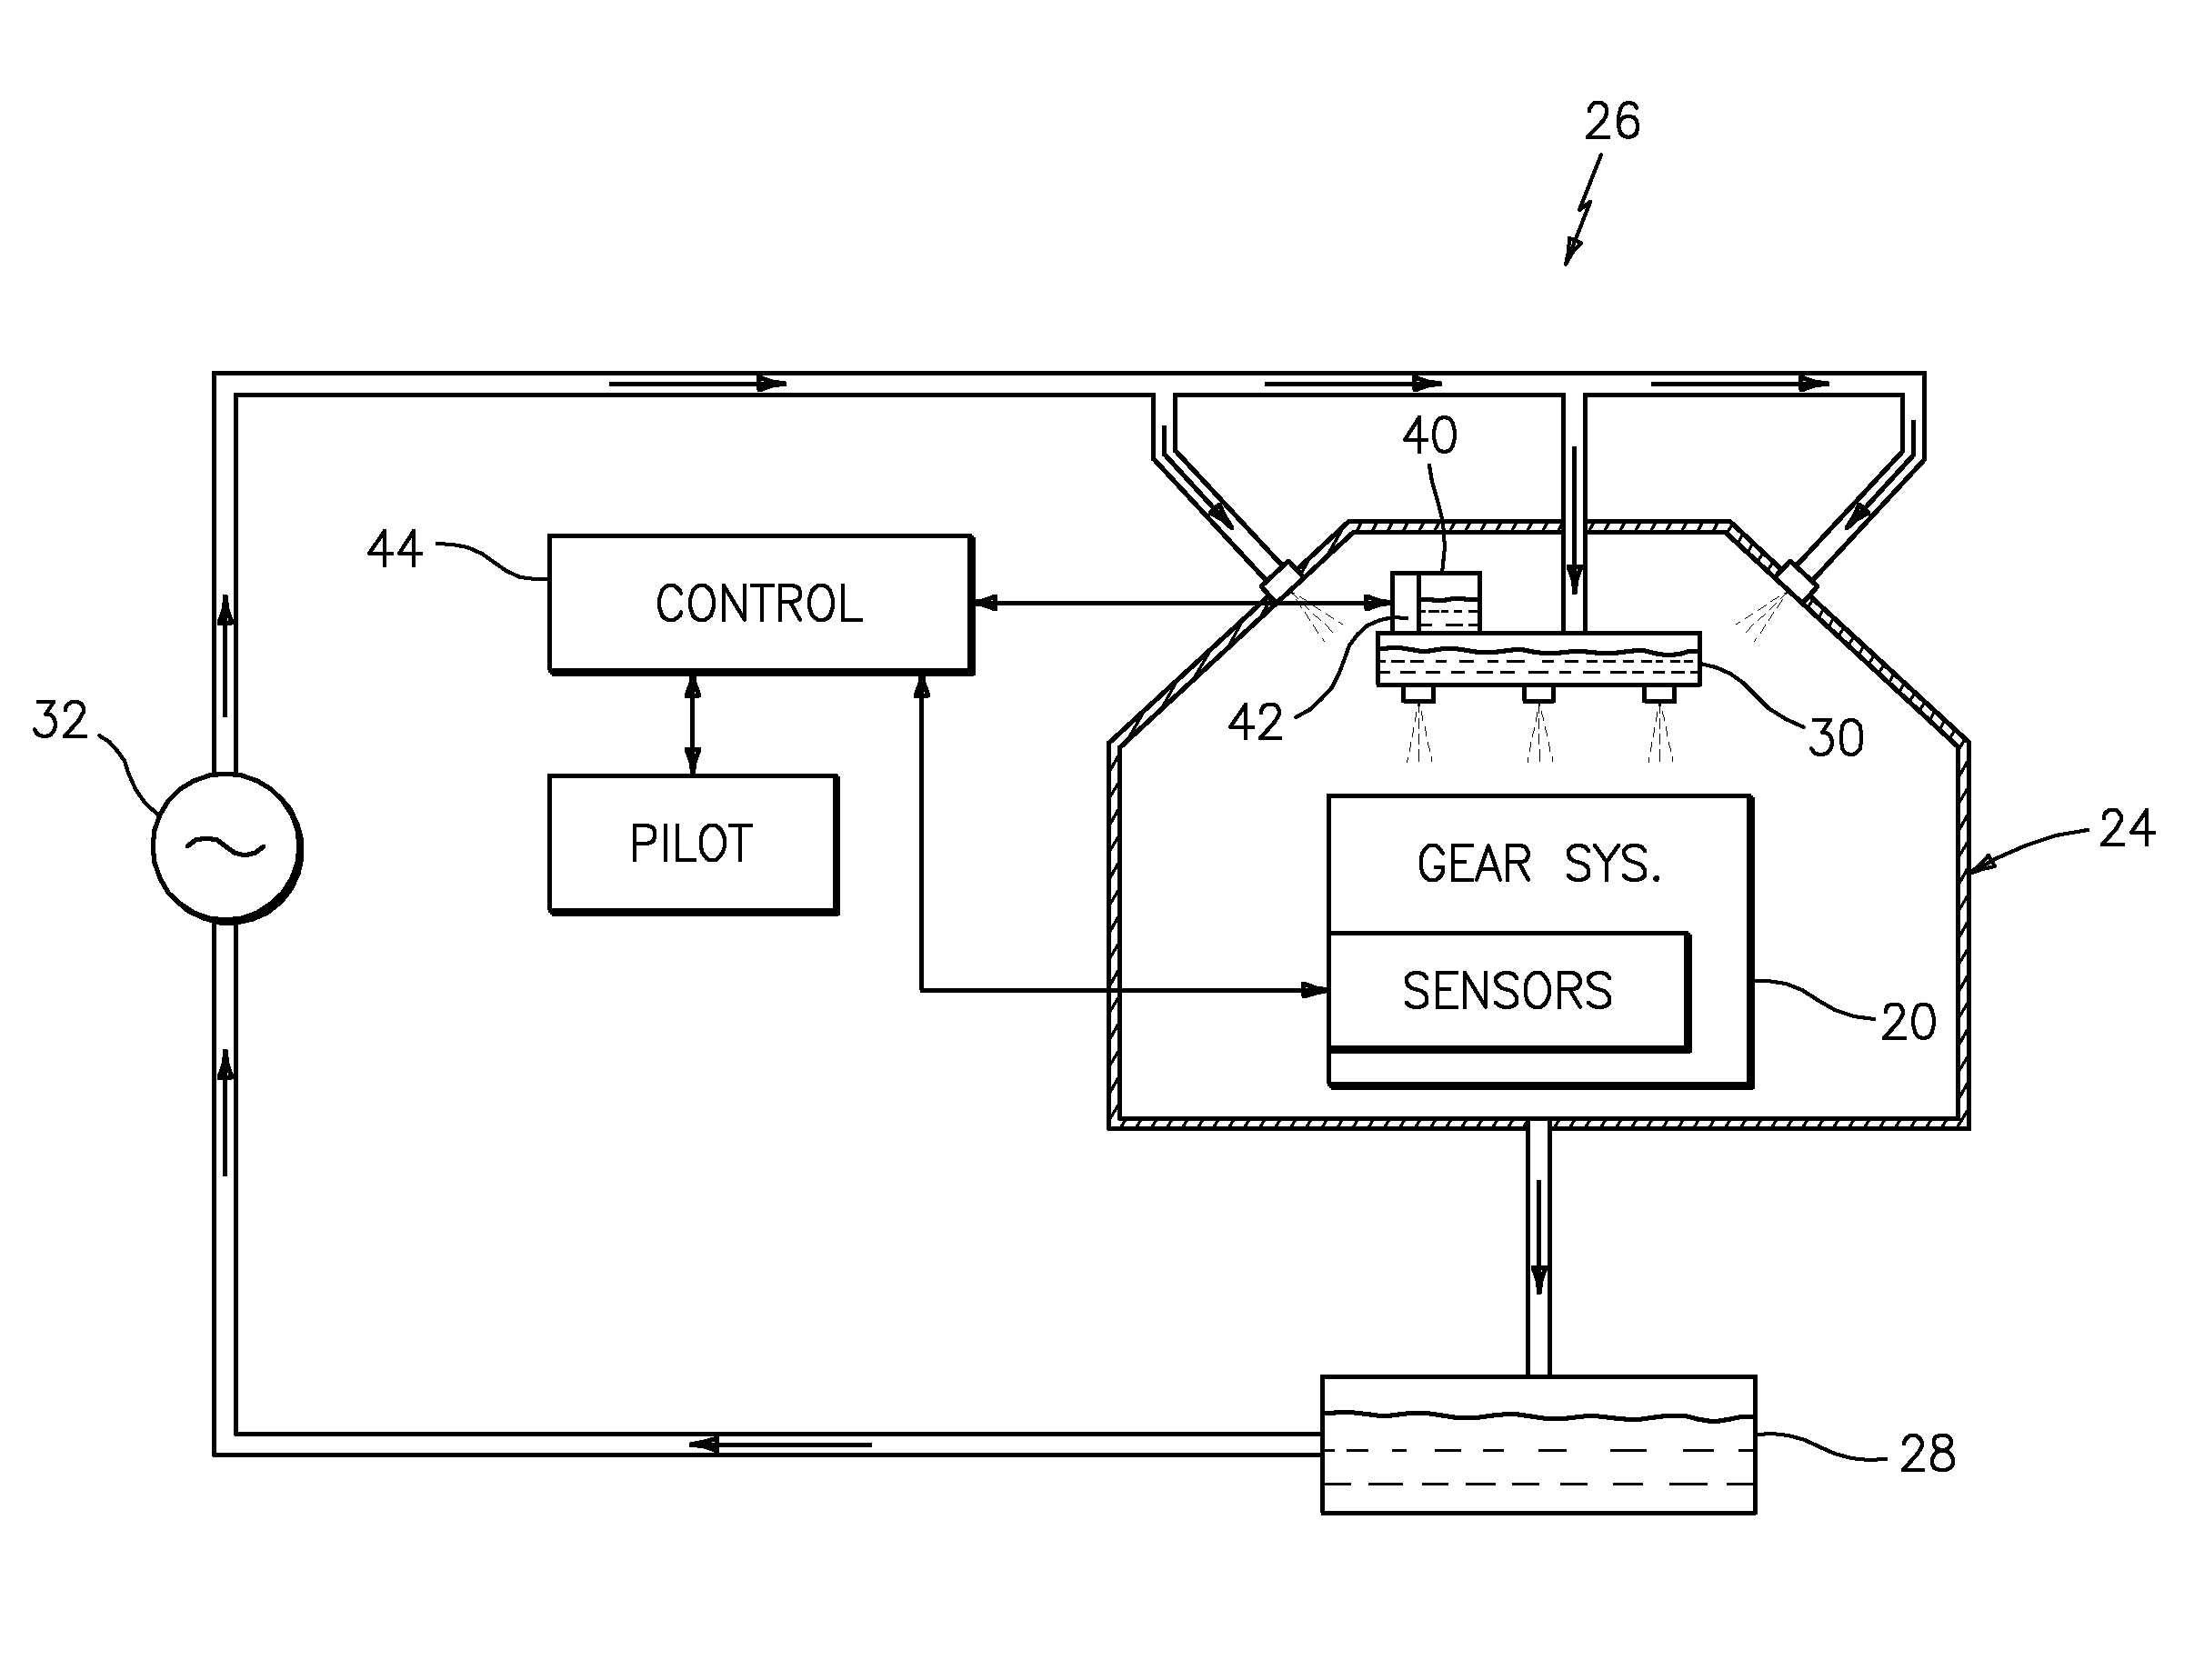 Secondary lubrication system with injectable additive